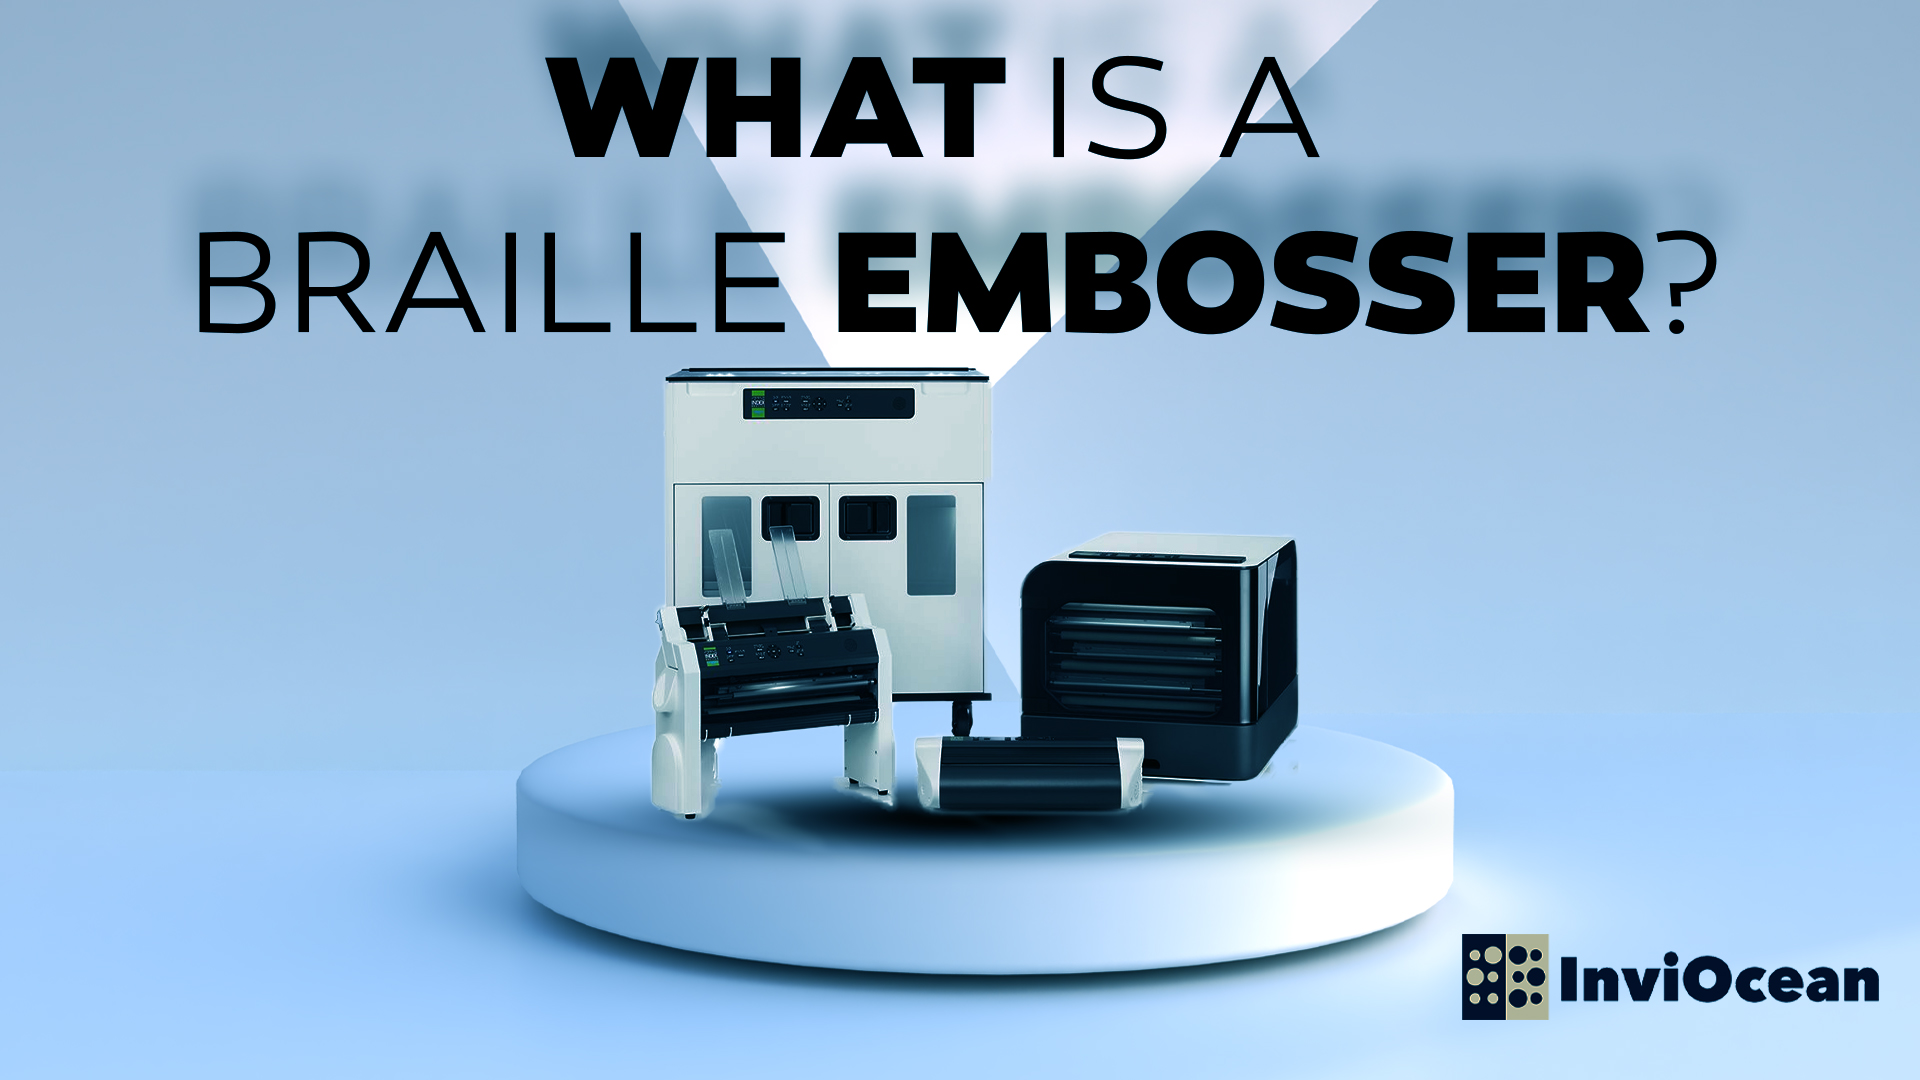 What is a braille embosser